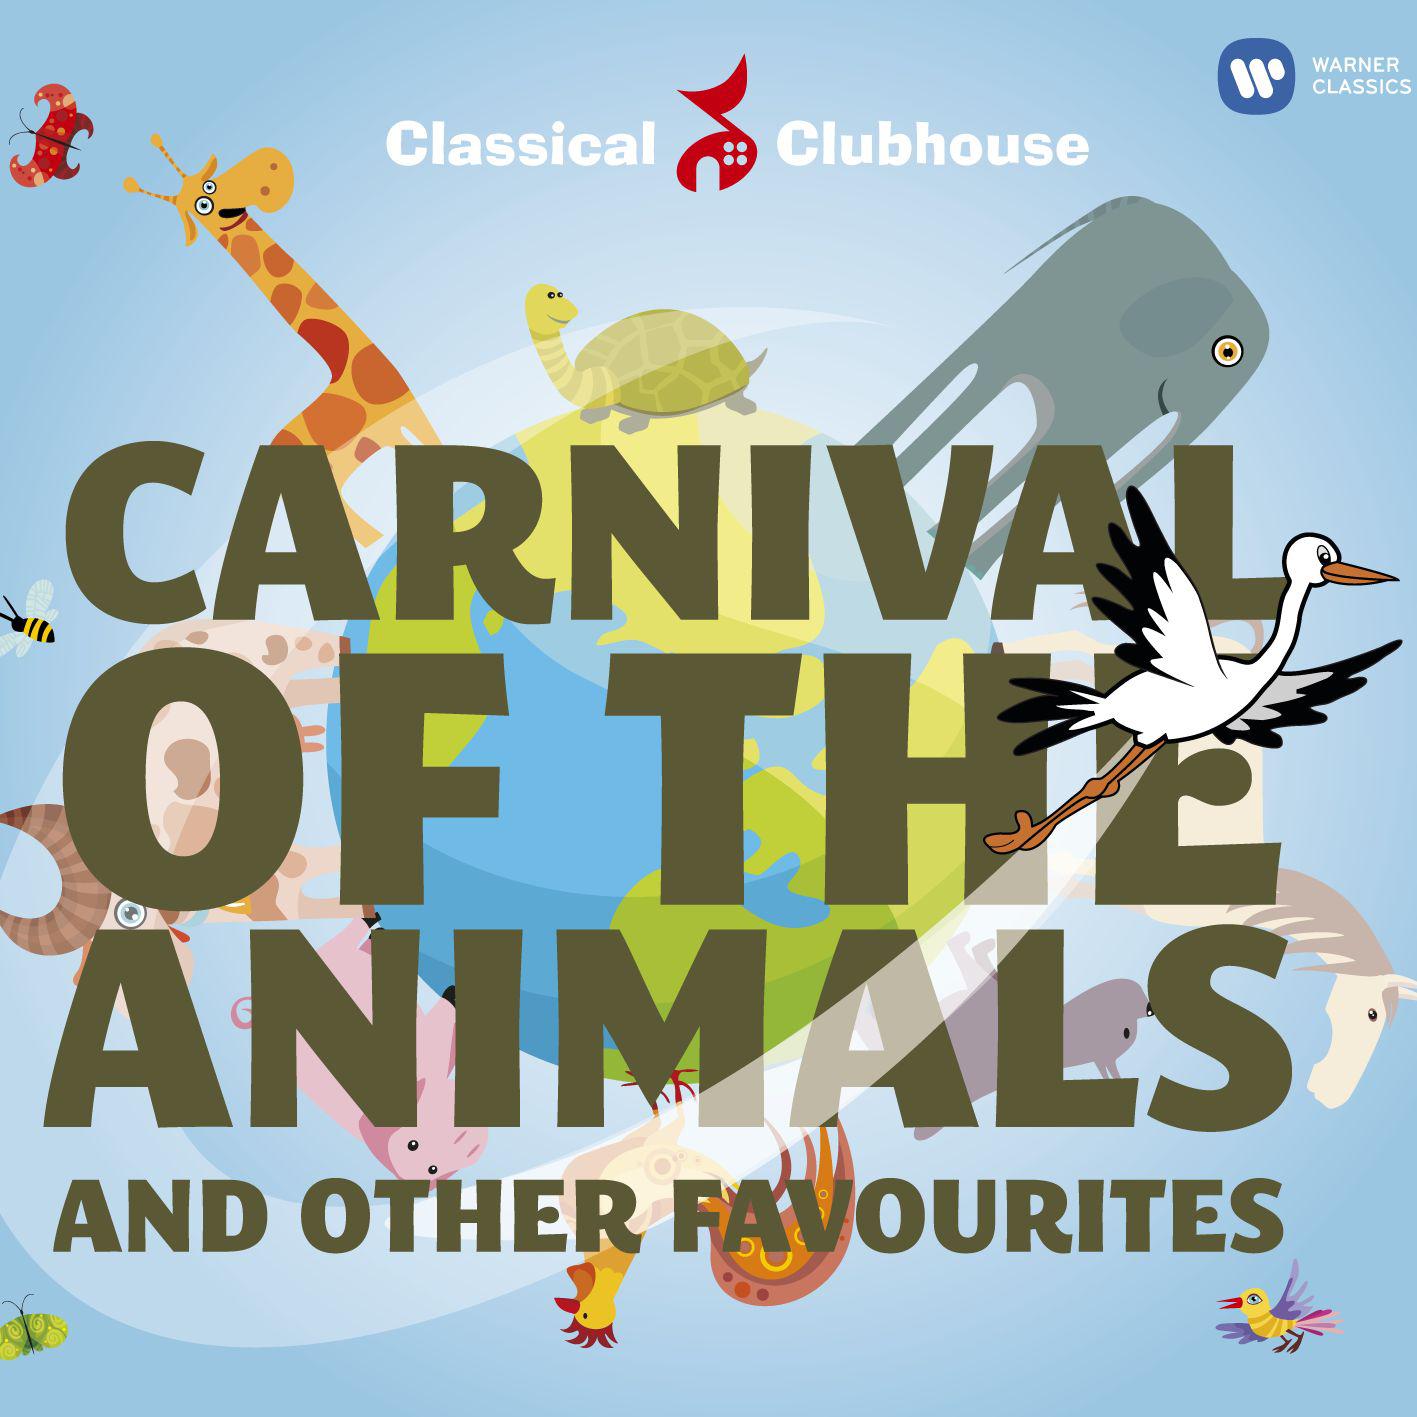 Le Carnaval des animaux: III. He miones